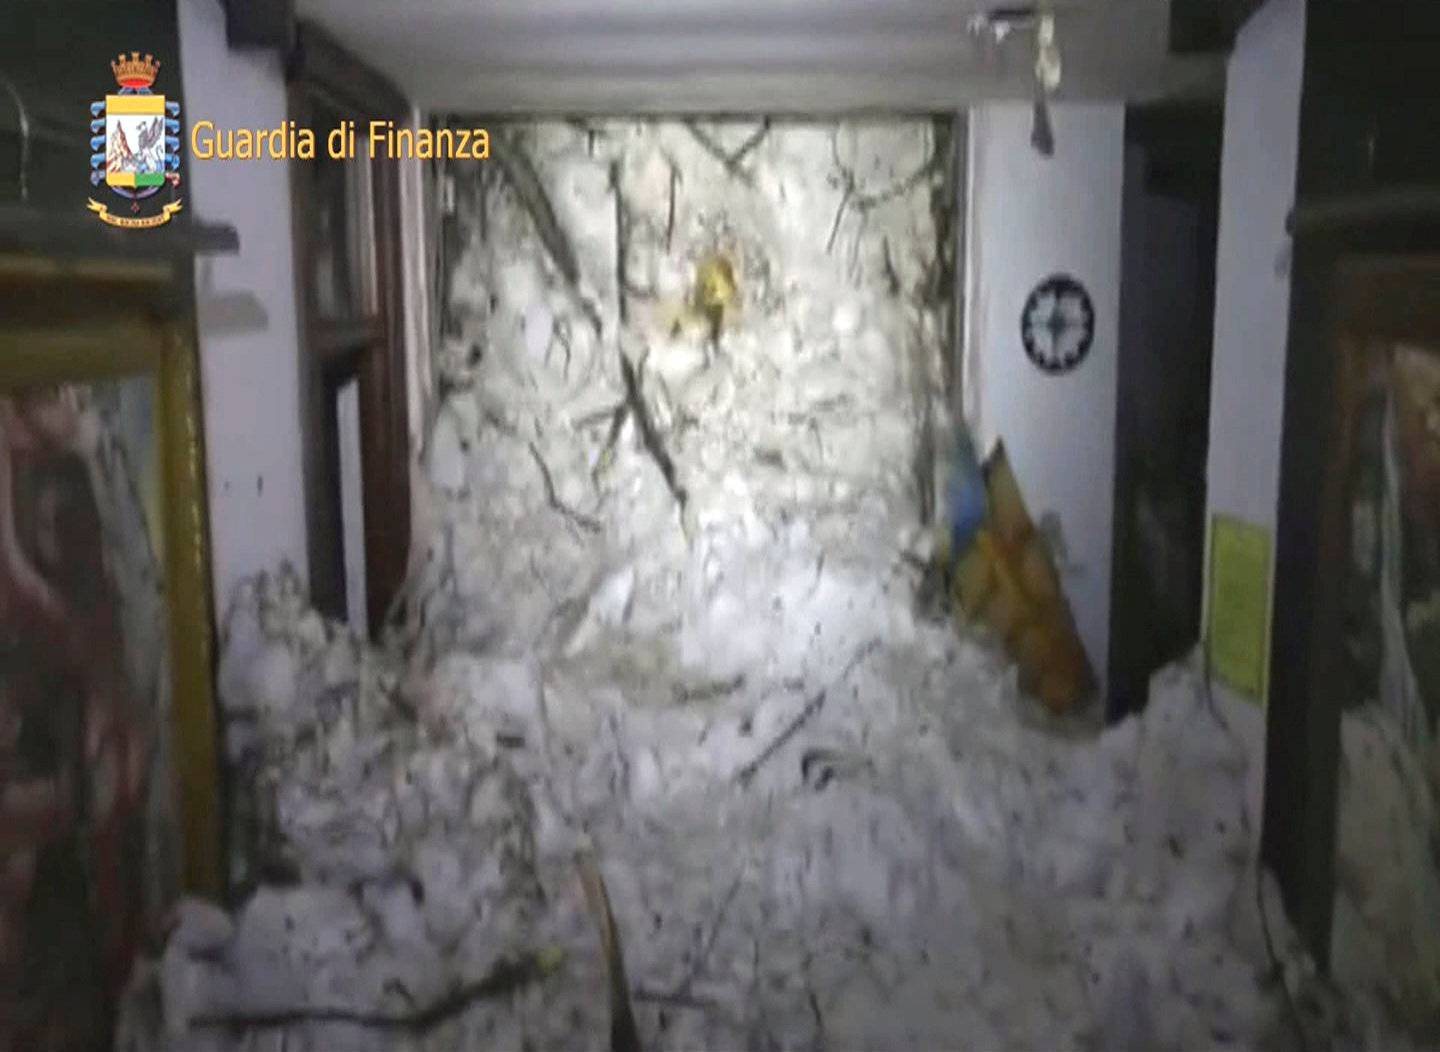 A photo taken from a video shows the snow inside the Hotel Rigopiano in Farindola, central Italy, hit by an avalanche